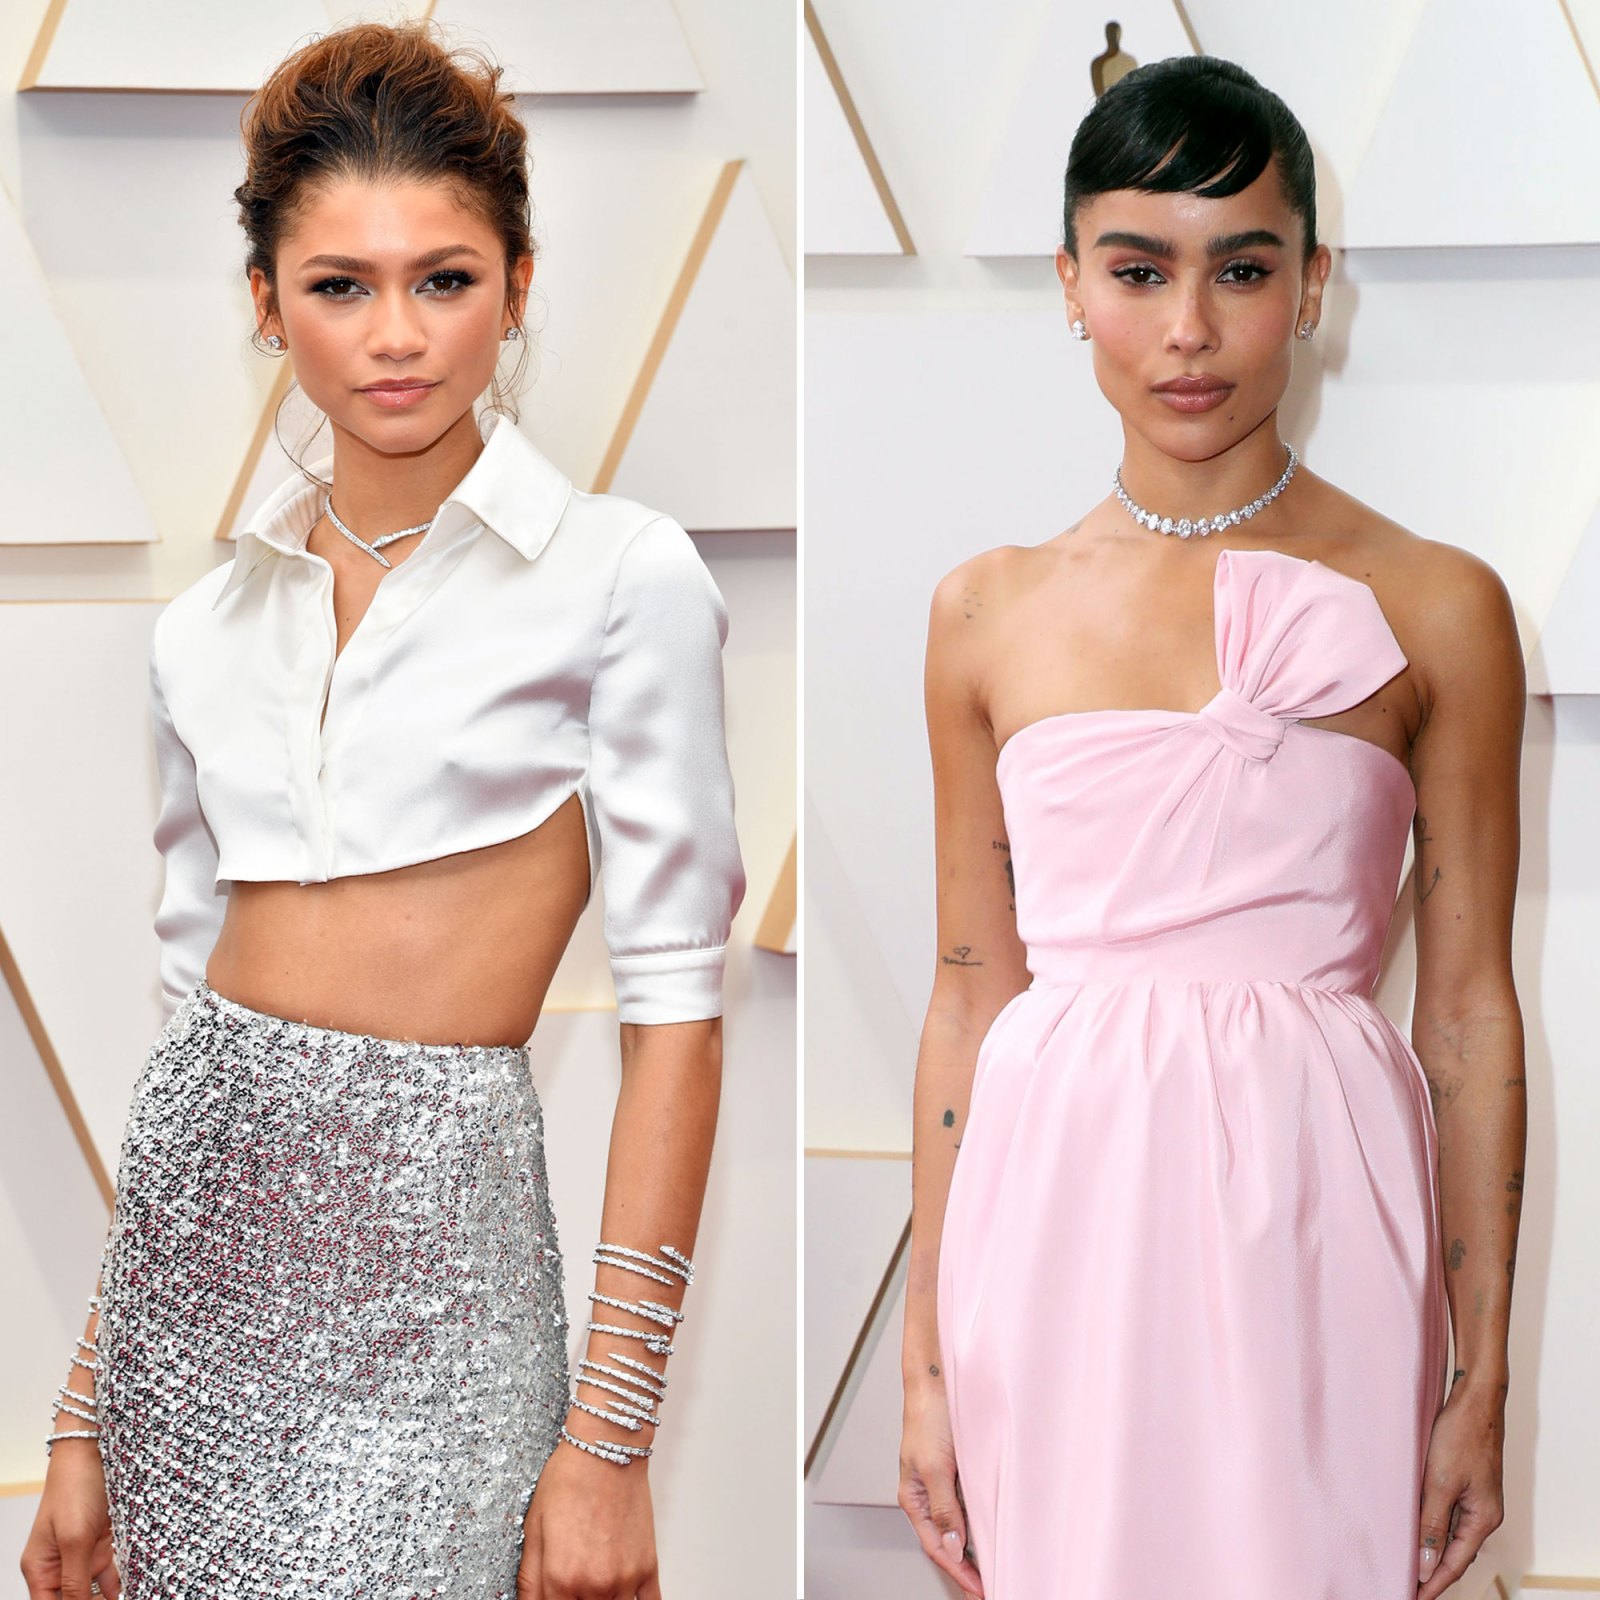 The Craziest Celebrity Bling From the Oscars 2022